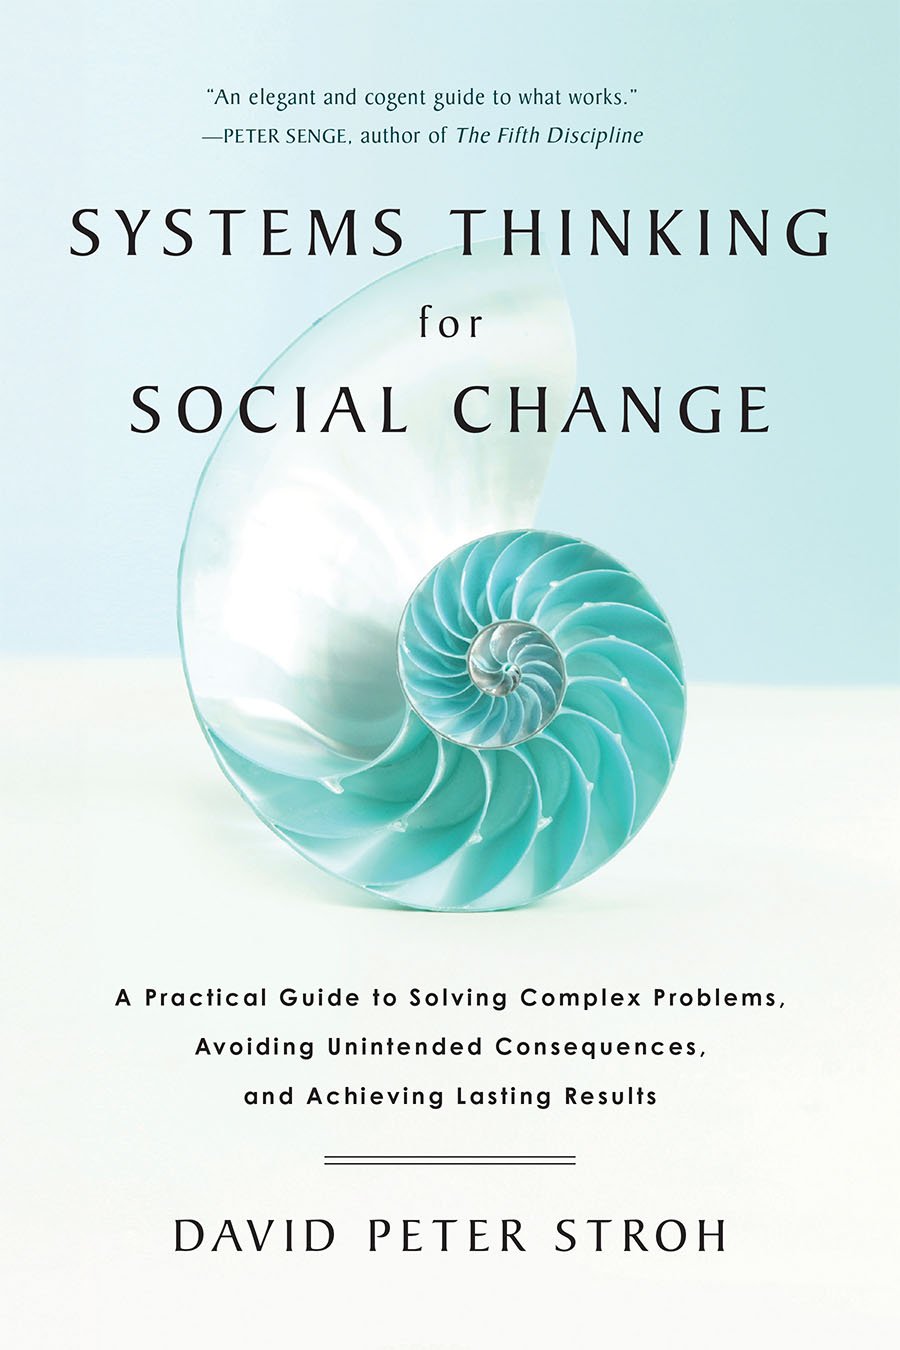 Green　Systems　Chelsea　Thinking　Change　Social　For　Publishing